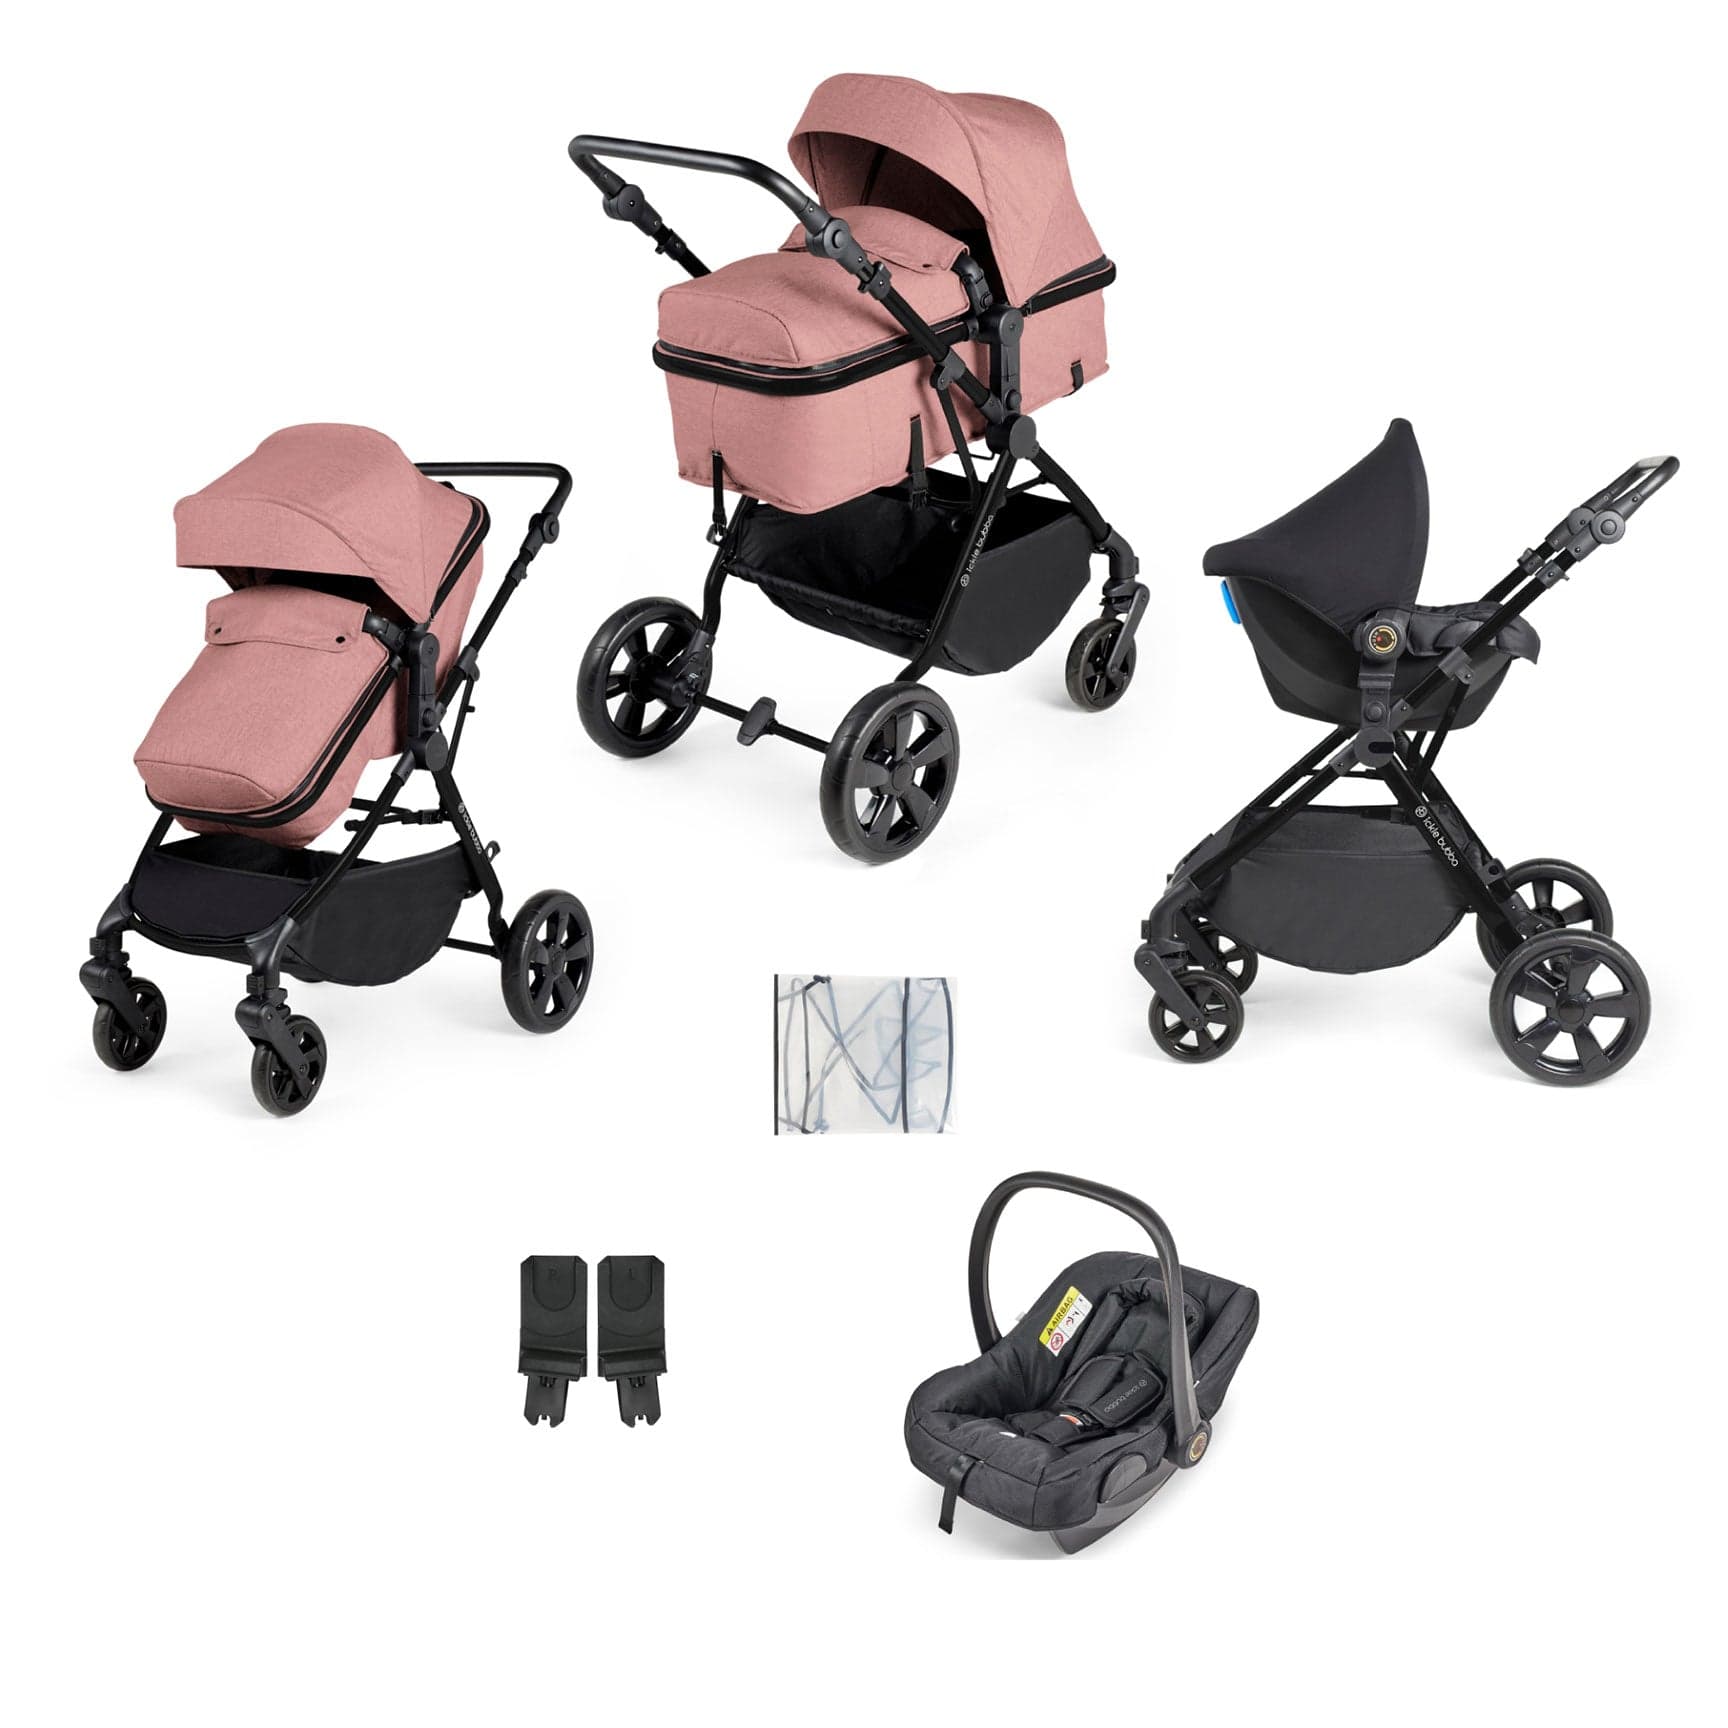 Ickle Bubba baby prams Ickle Bubba Comet 3-in-1 Travel System with Astral Car Seat - Dusty Pink 10-008-101-134